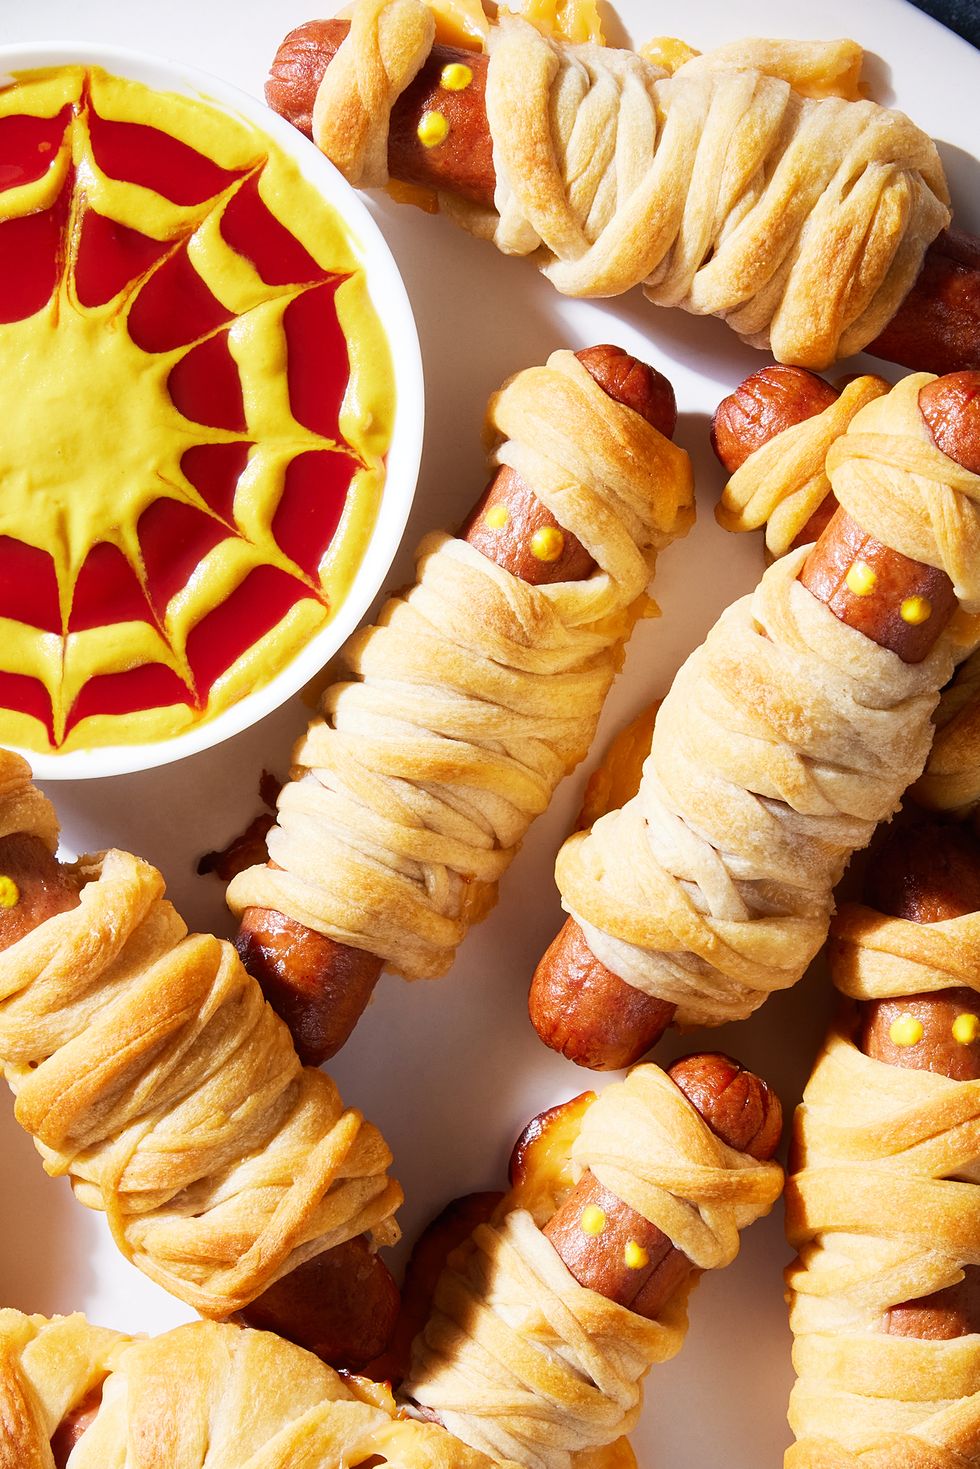 hot dogs with mustard eyes wrapped in crescent dough with cheese and served a mustard and ketchup dip